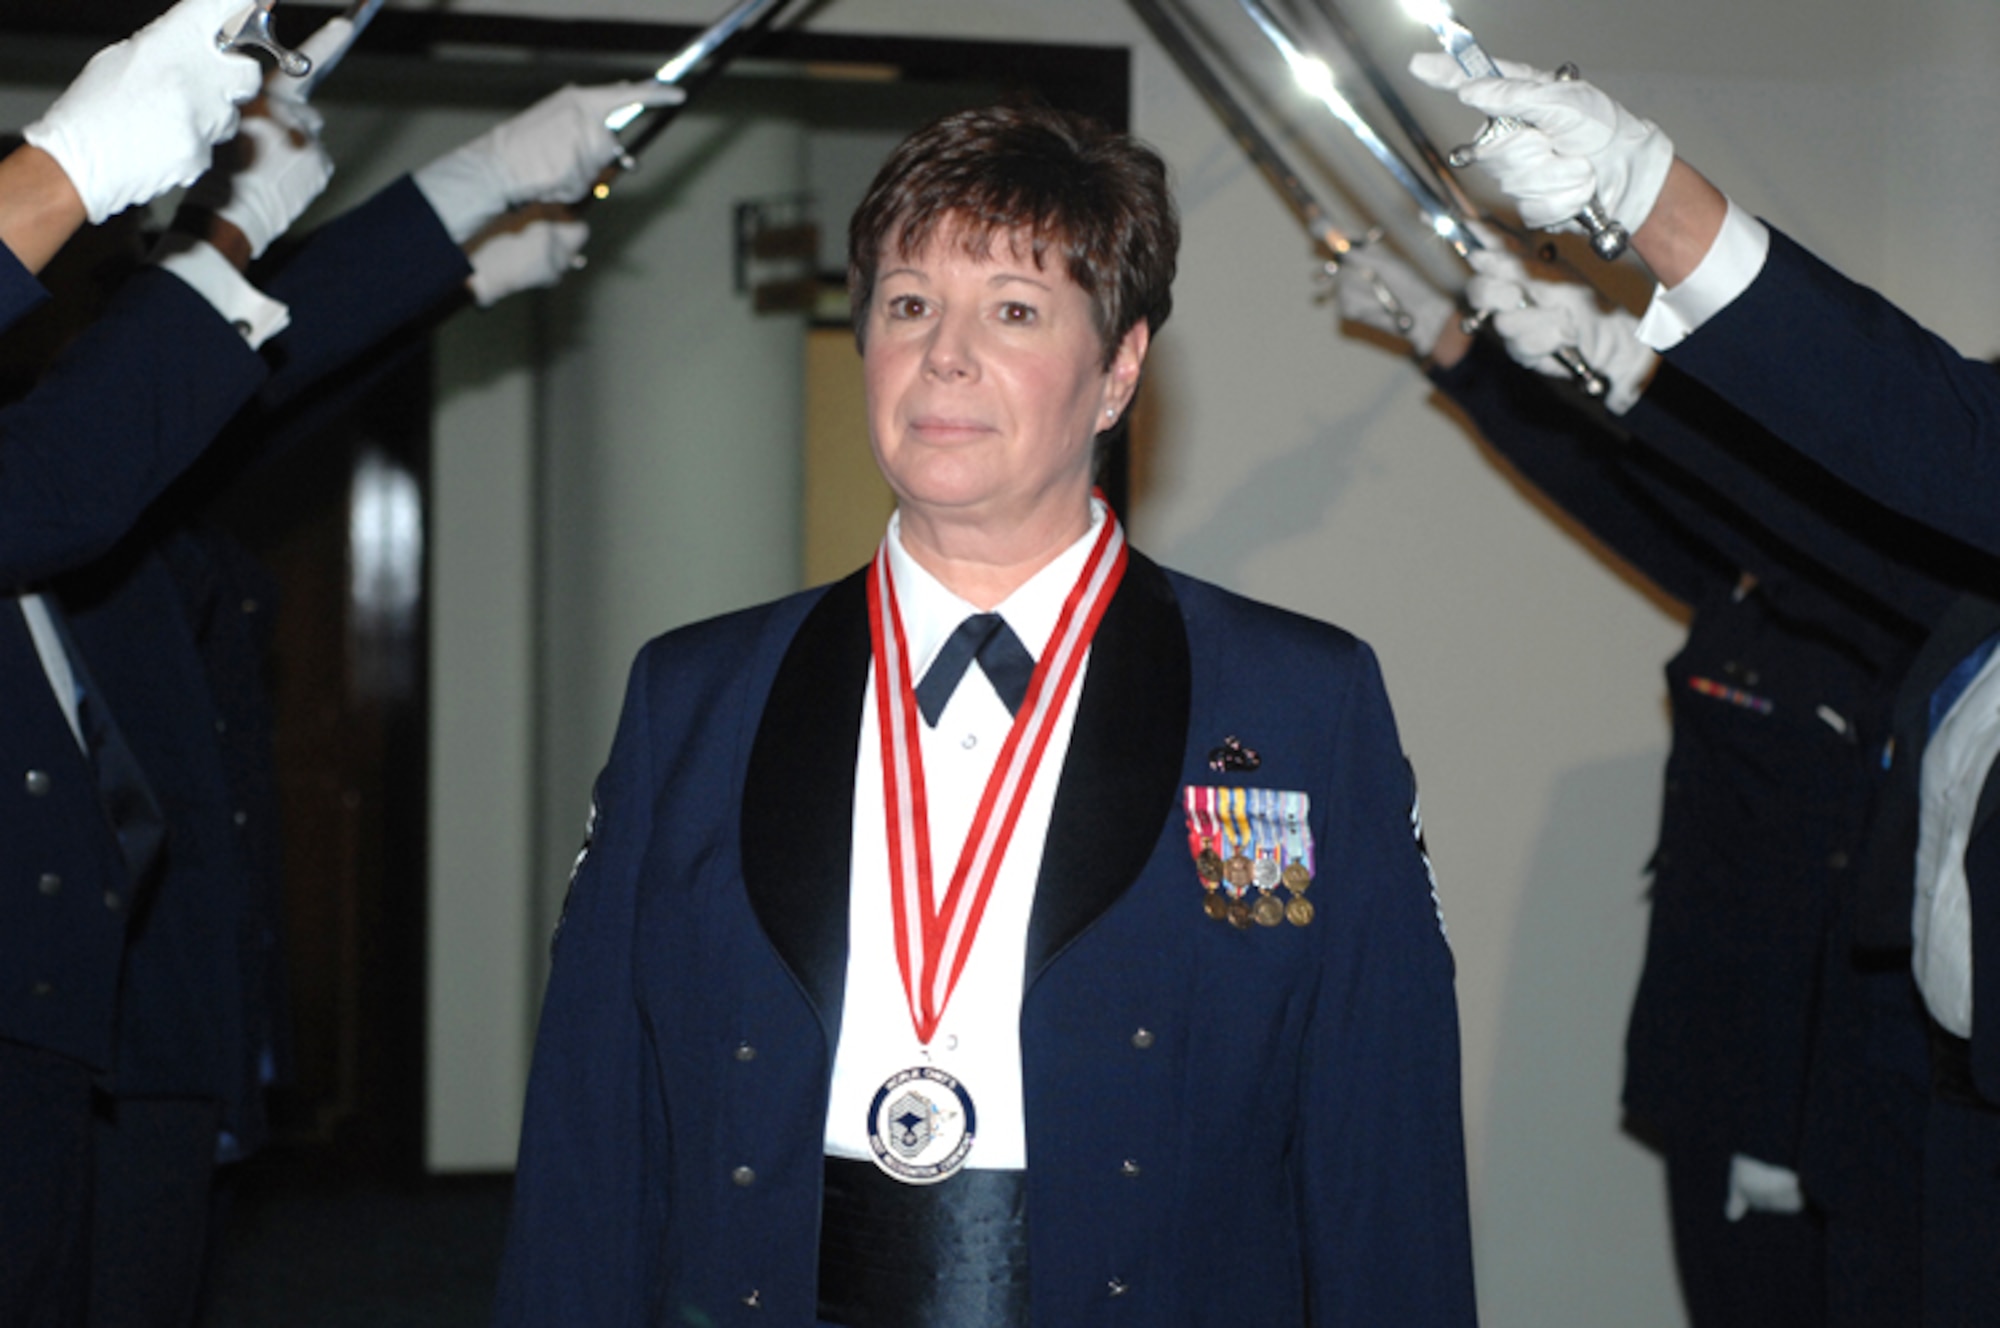 Senior Master Sgt. Denise Mikolajczyk from the 39th Mission Support Squadron passes through the Honor Guard cordon of swords during the Chief Induction Ceremony Feb. 9 at the Consolidatedd Club. (U. S. Air Force Photo by Technical Sergeant Shirley Henderson)